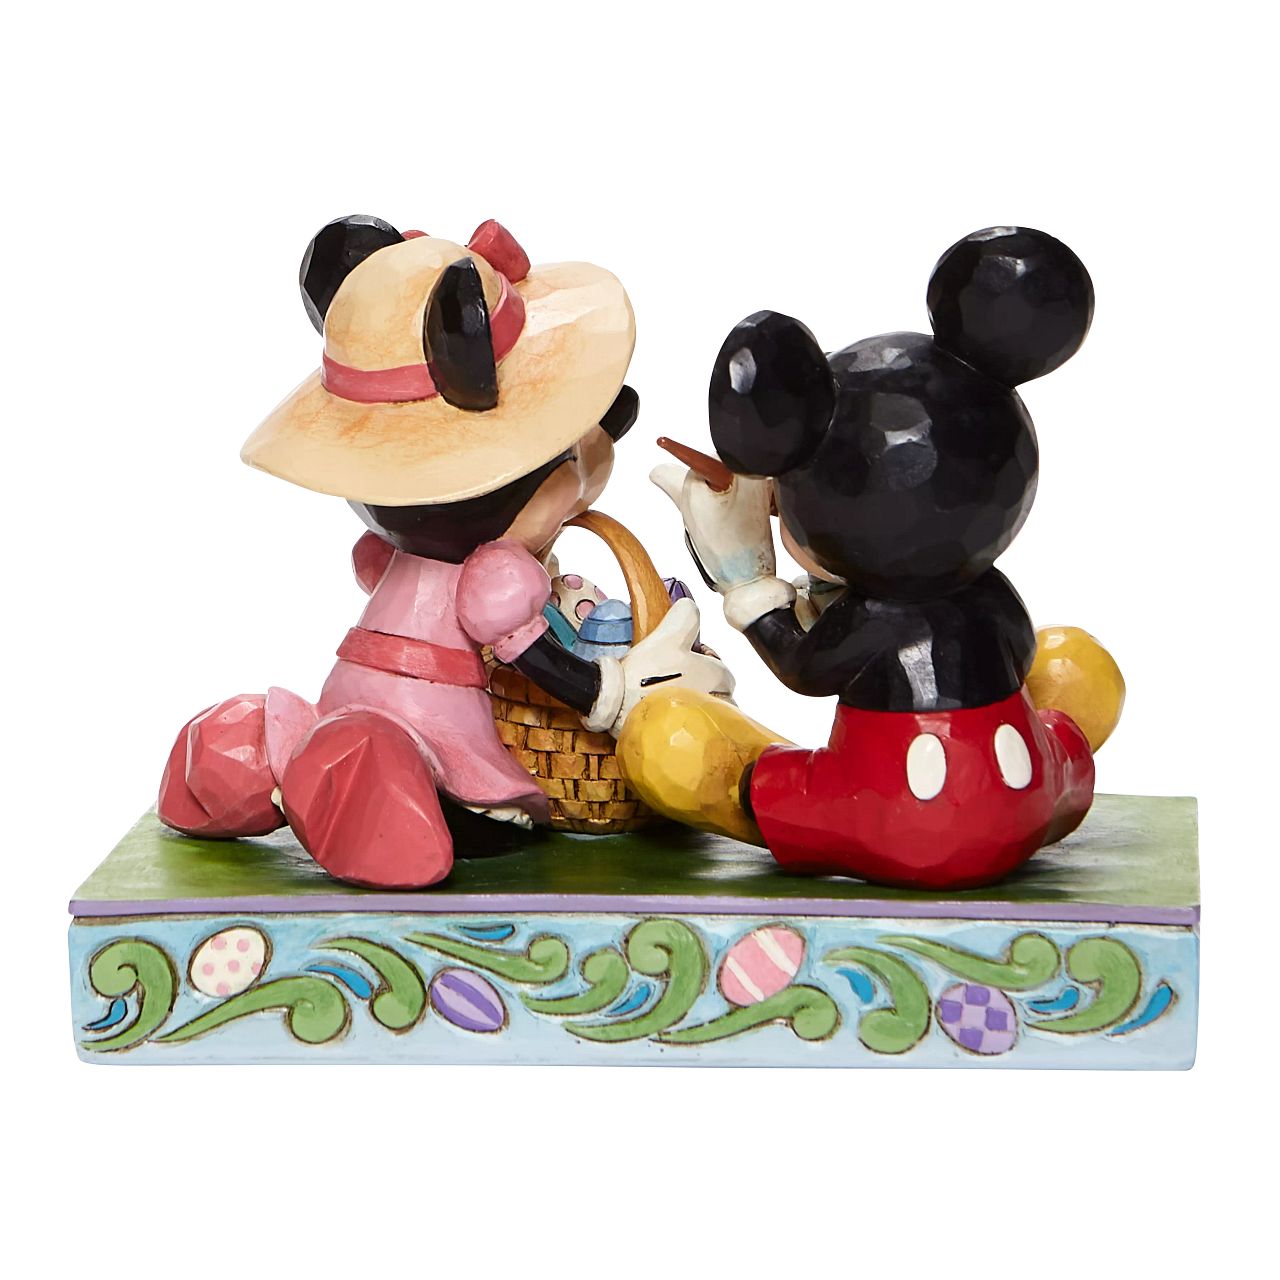 Jim Shore Easter Artistry - Mickey and Minnie Easter Figurine  In this joyful scene, Mickey and his sweetheart Minnie, are filled with excitement as they perfect their eggs for an egg hunt. Brighten up your collection with this vibrantly, colorful Easter piece by Jim Shore.